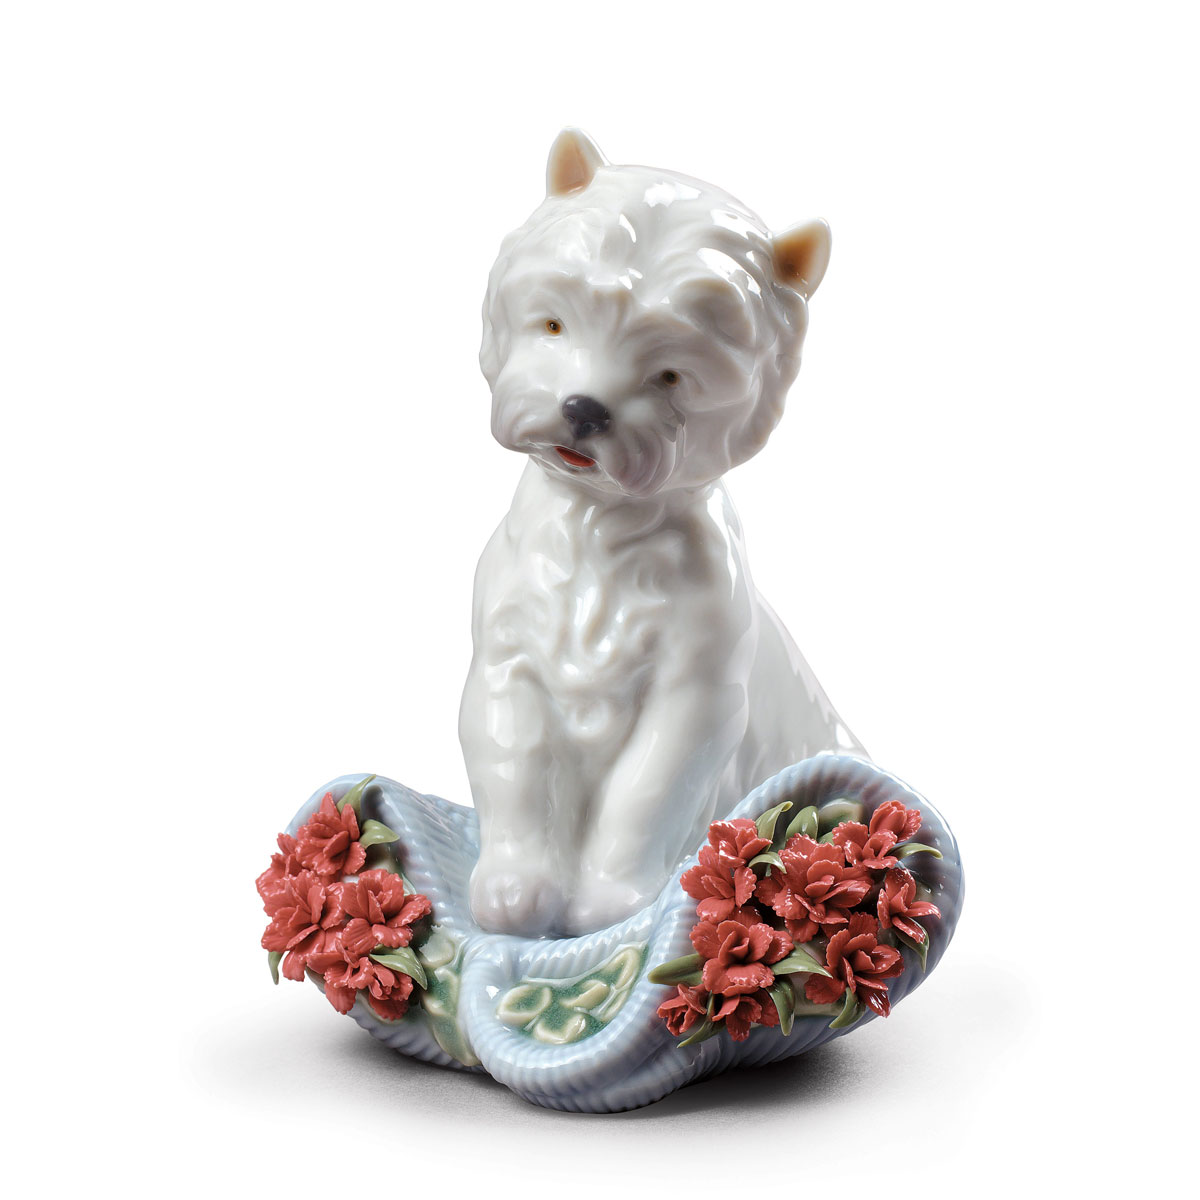 Lladro Classic Sculpture, Playful Character Dog Figurine Type 164